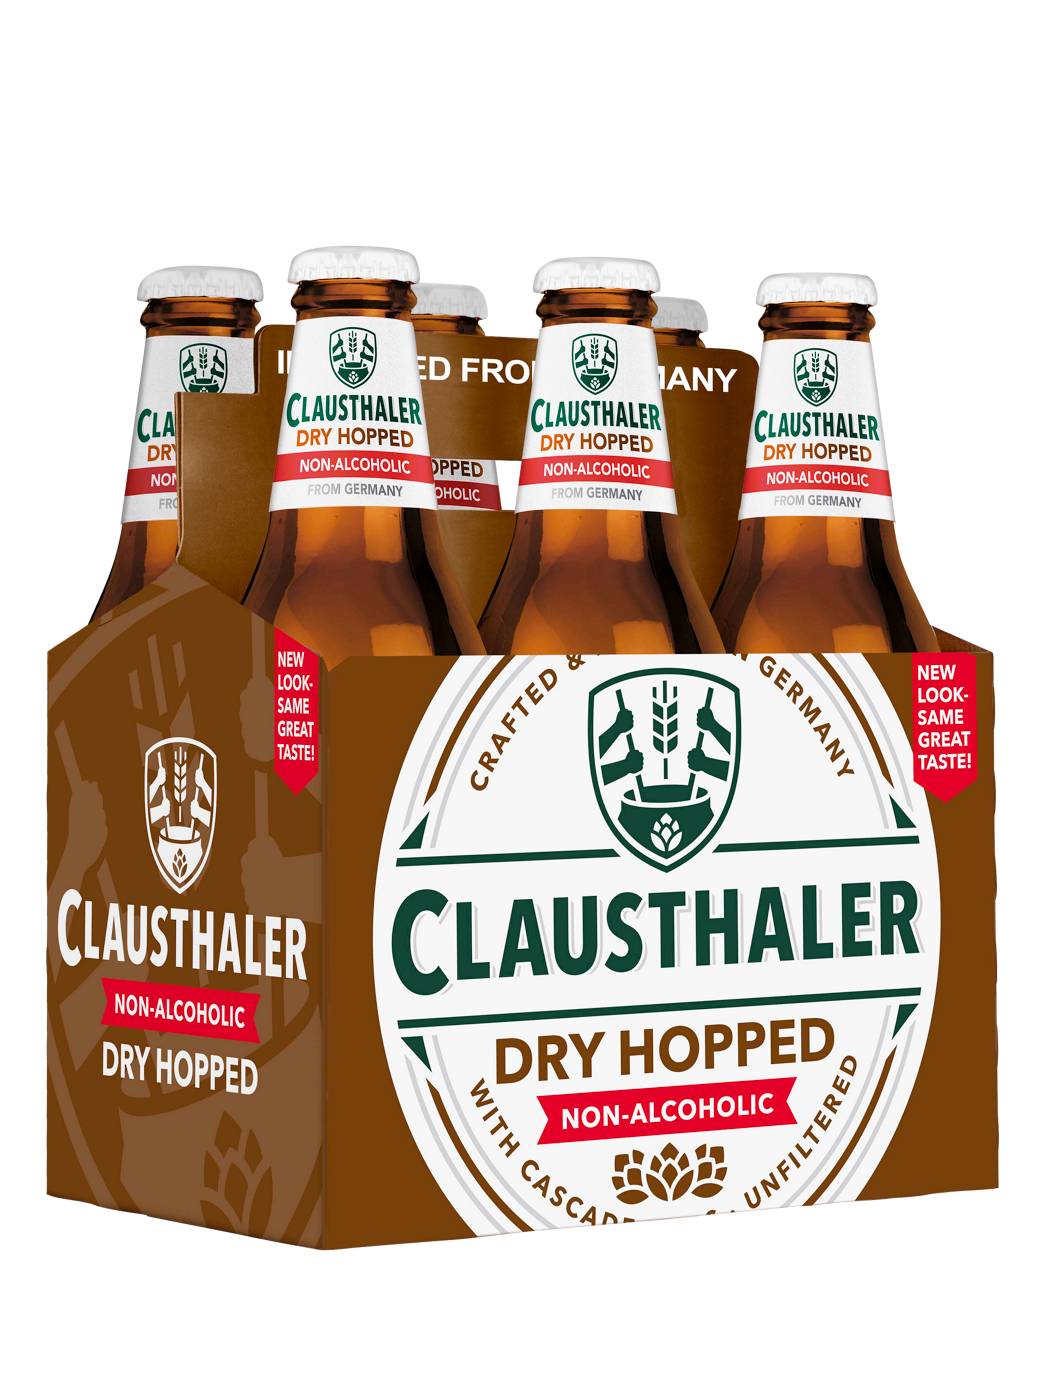 Clausthaler Dry Hopped Non-Alcoholic Beer 6 pk Bottles; image 1 of 2